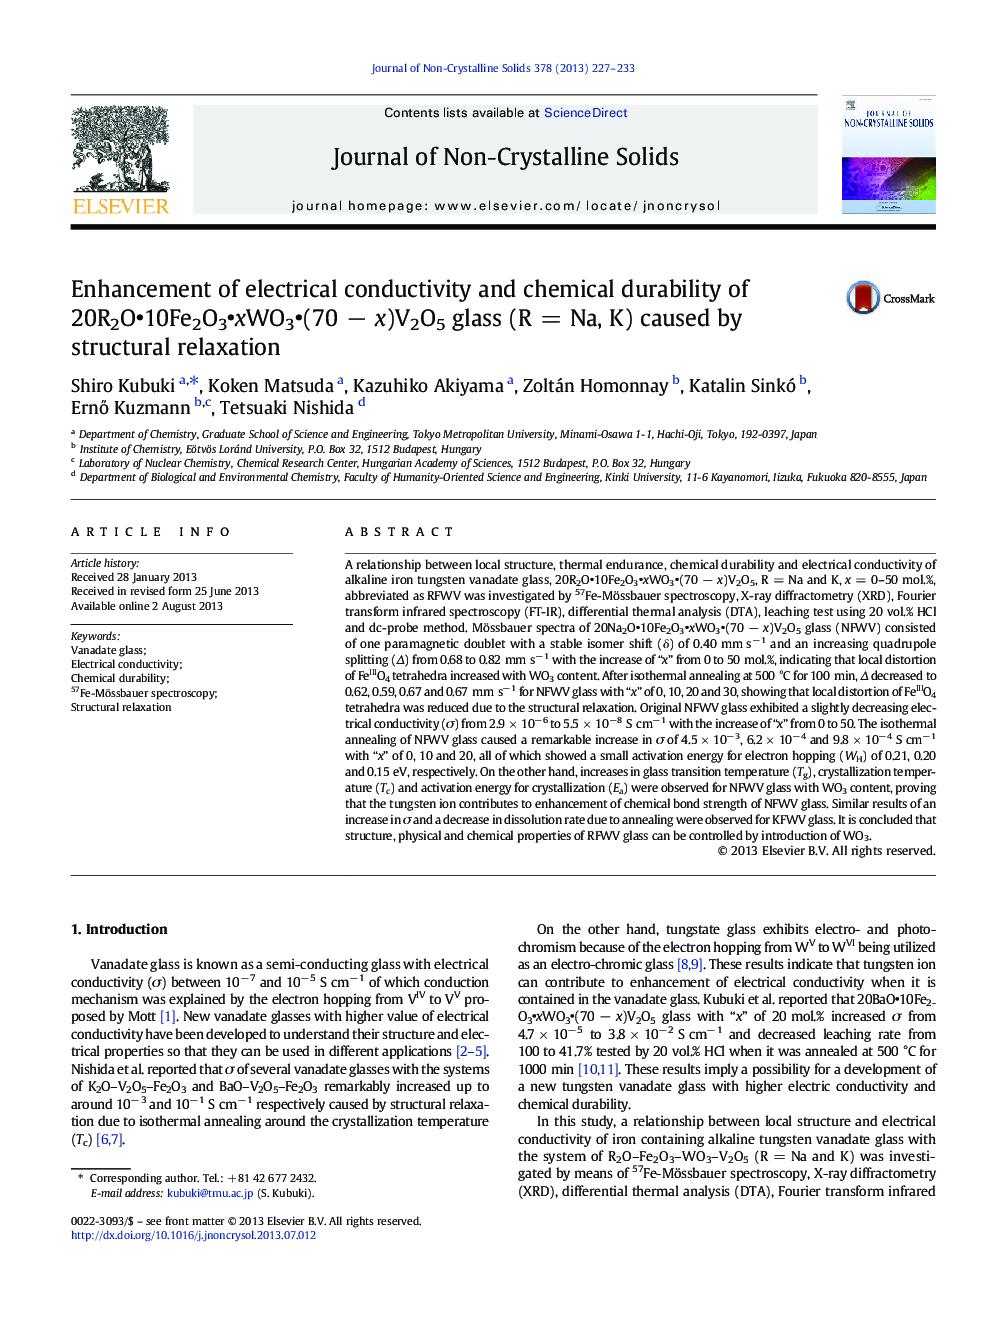 Enhancement of electrical conductivity and chemical durability of 20R2Oâ¢10Fe2O3â¢xWO3â¢(70Â âÂ x)V2O5 glass (RÂ =Â Na, K) caused by structural relaxation